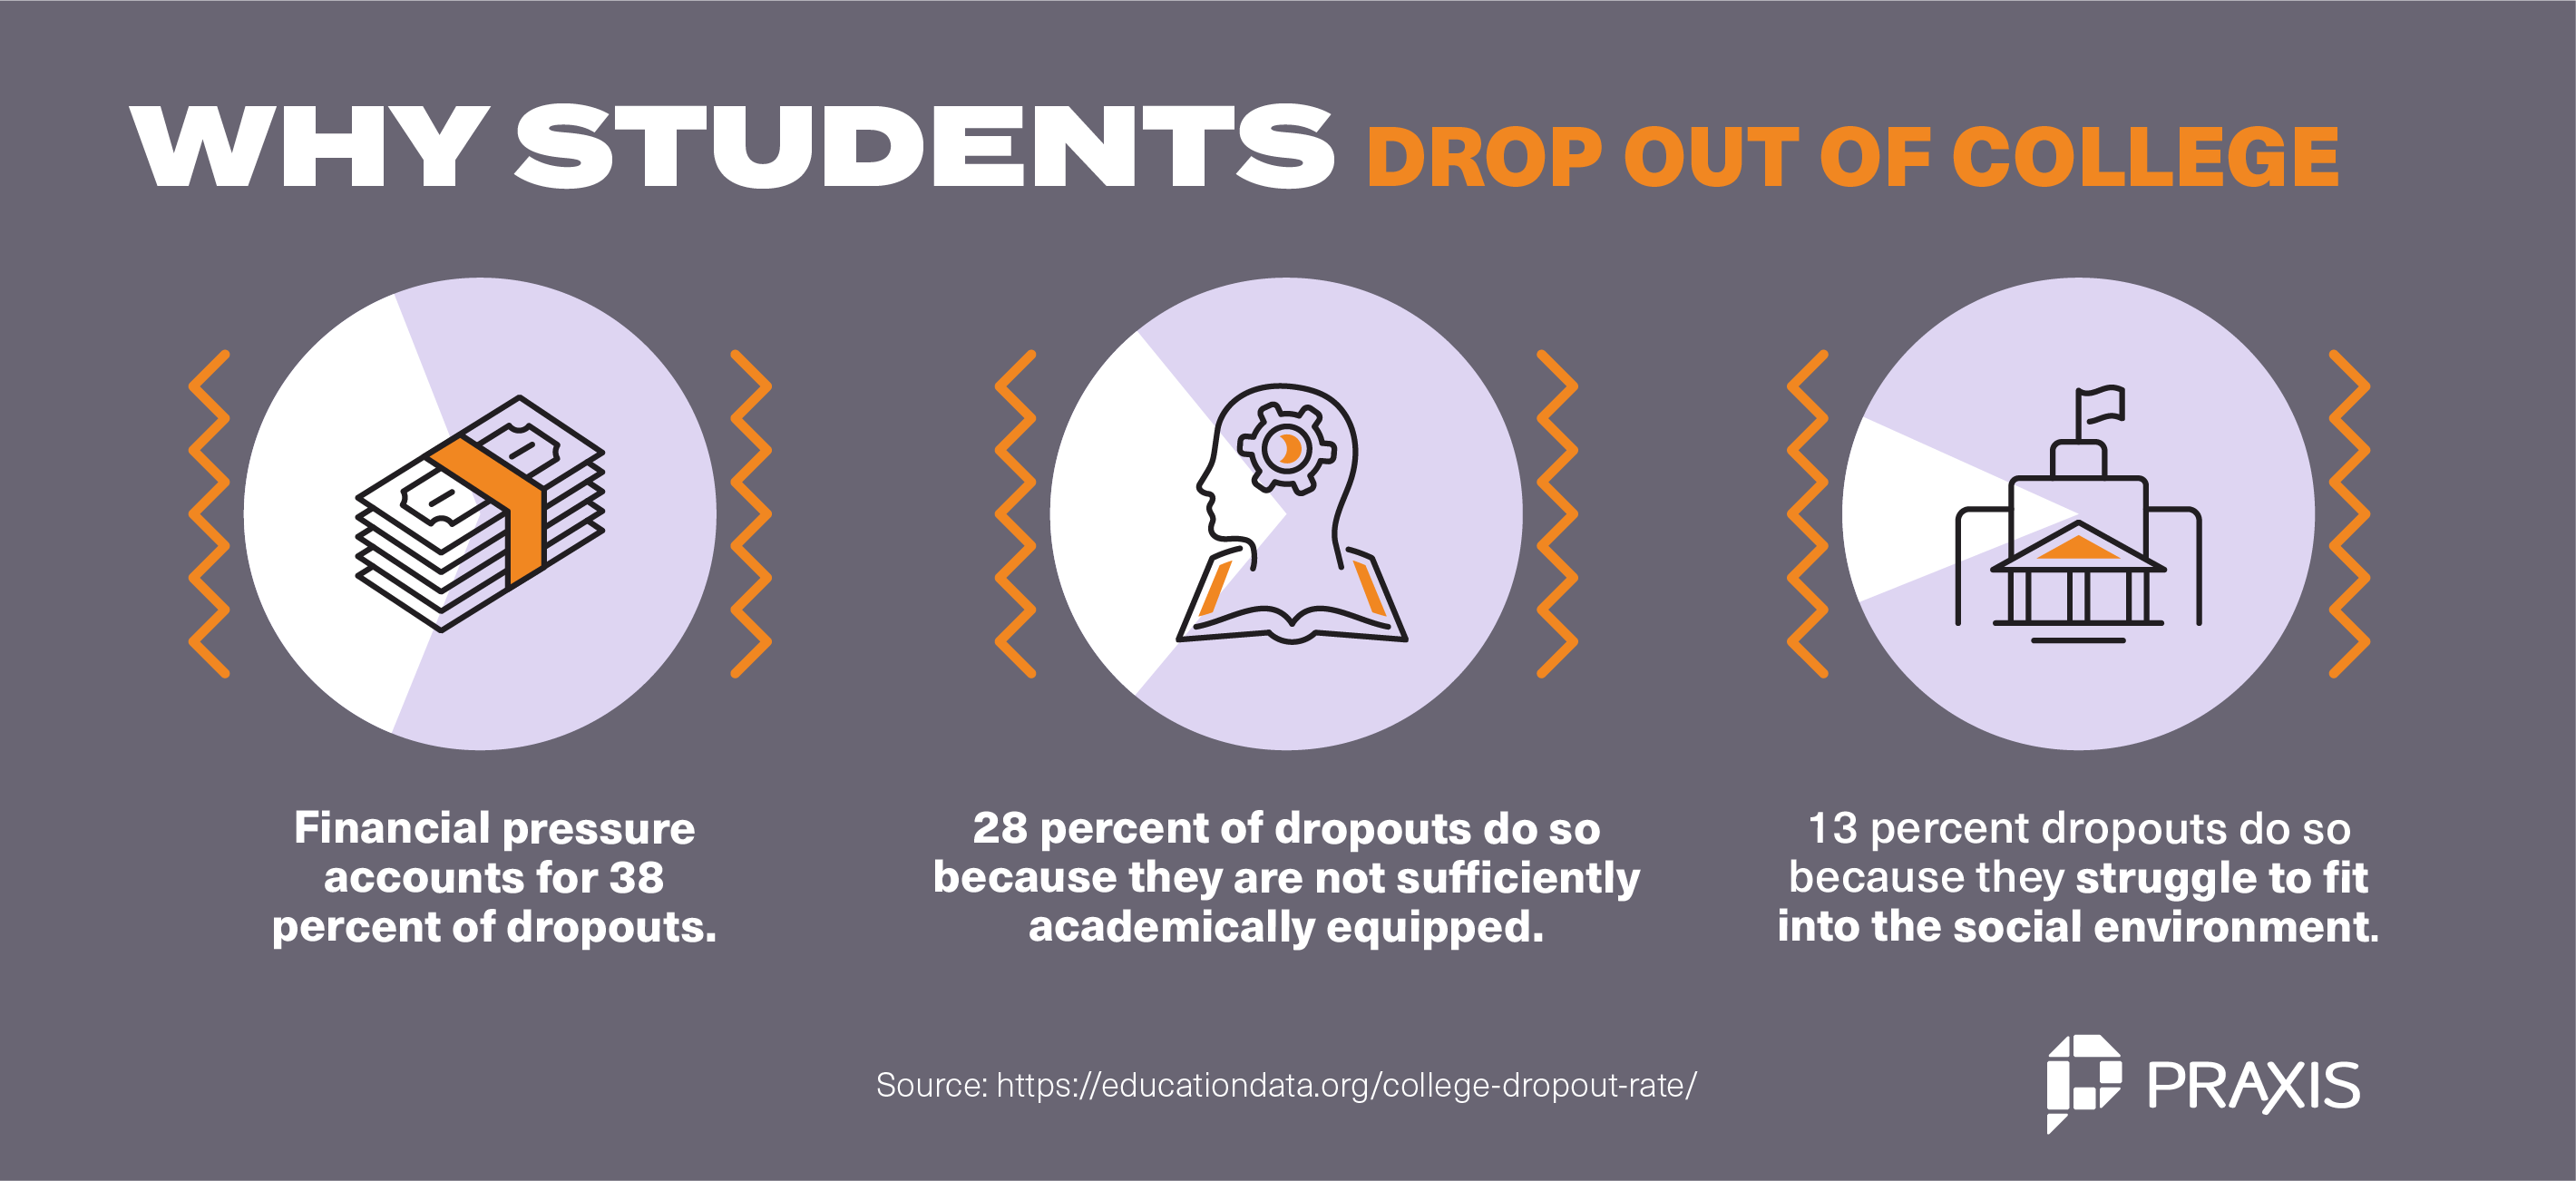 why students drop out of college